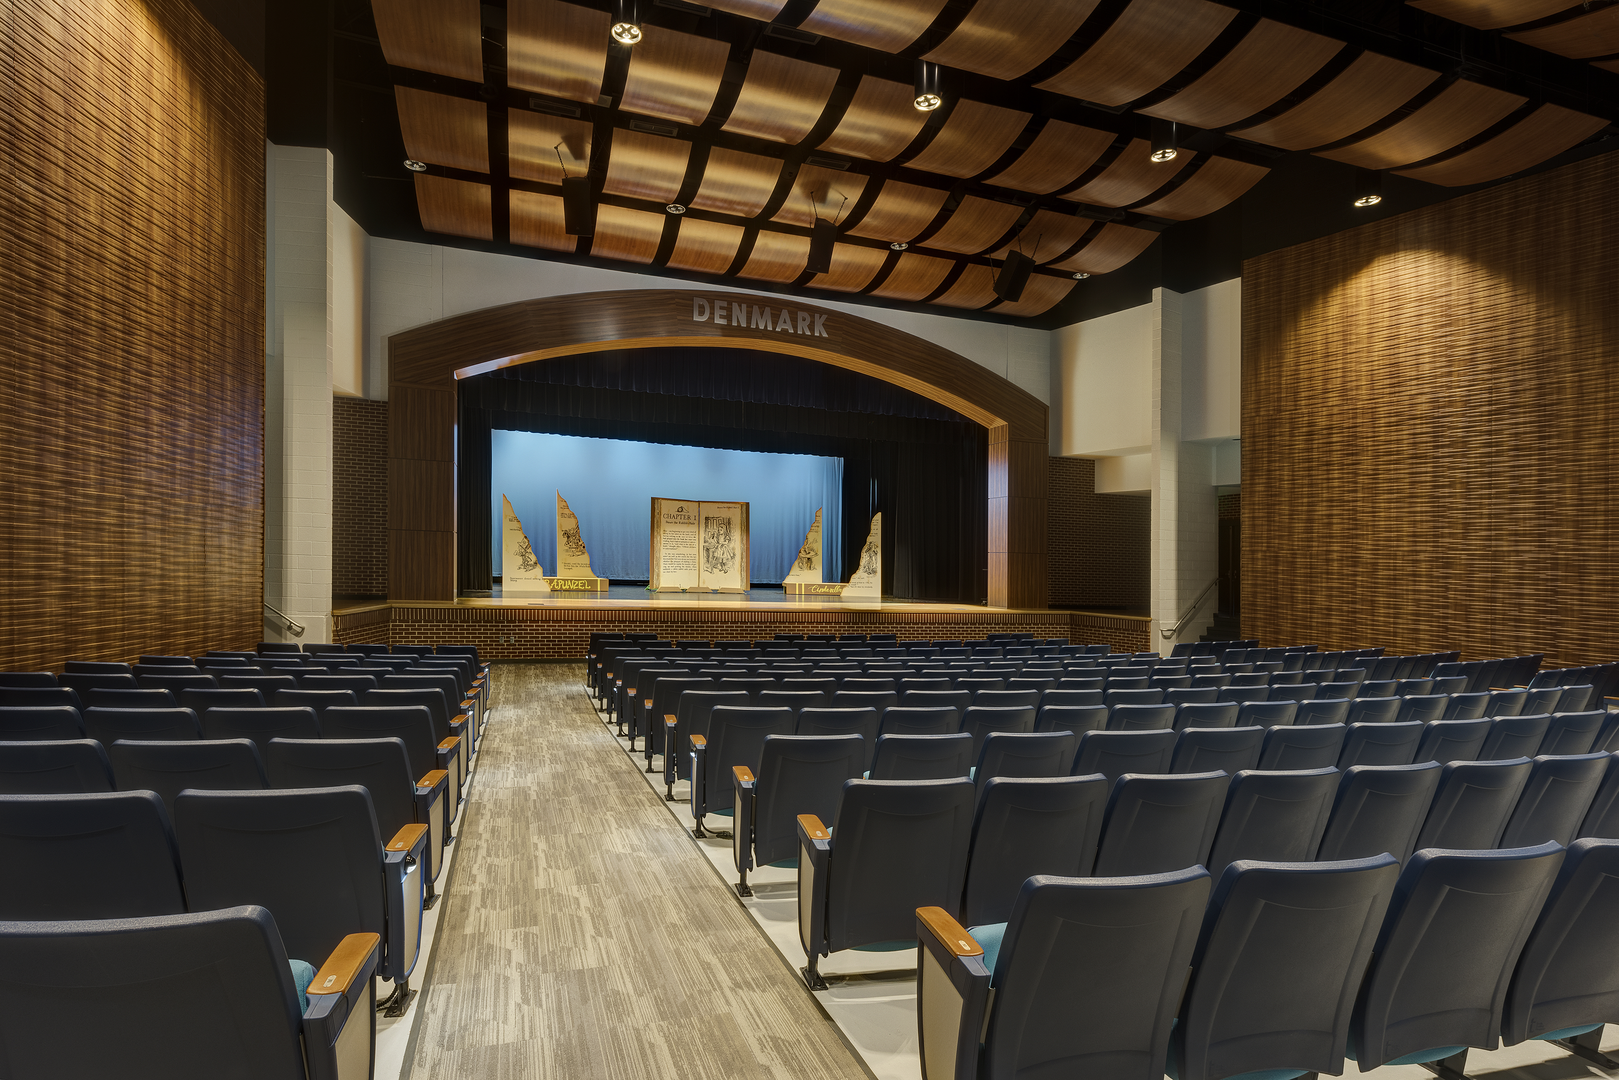 Auditorium with black chairs and brown walls/ceiling